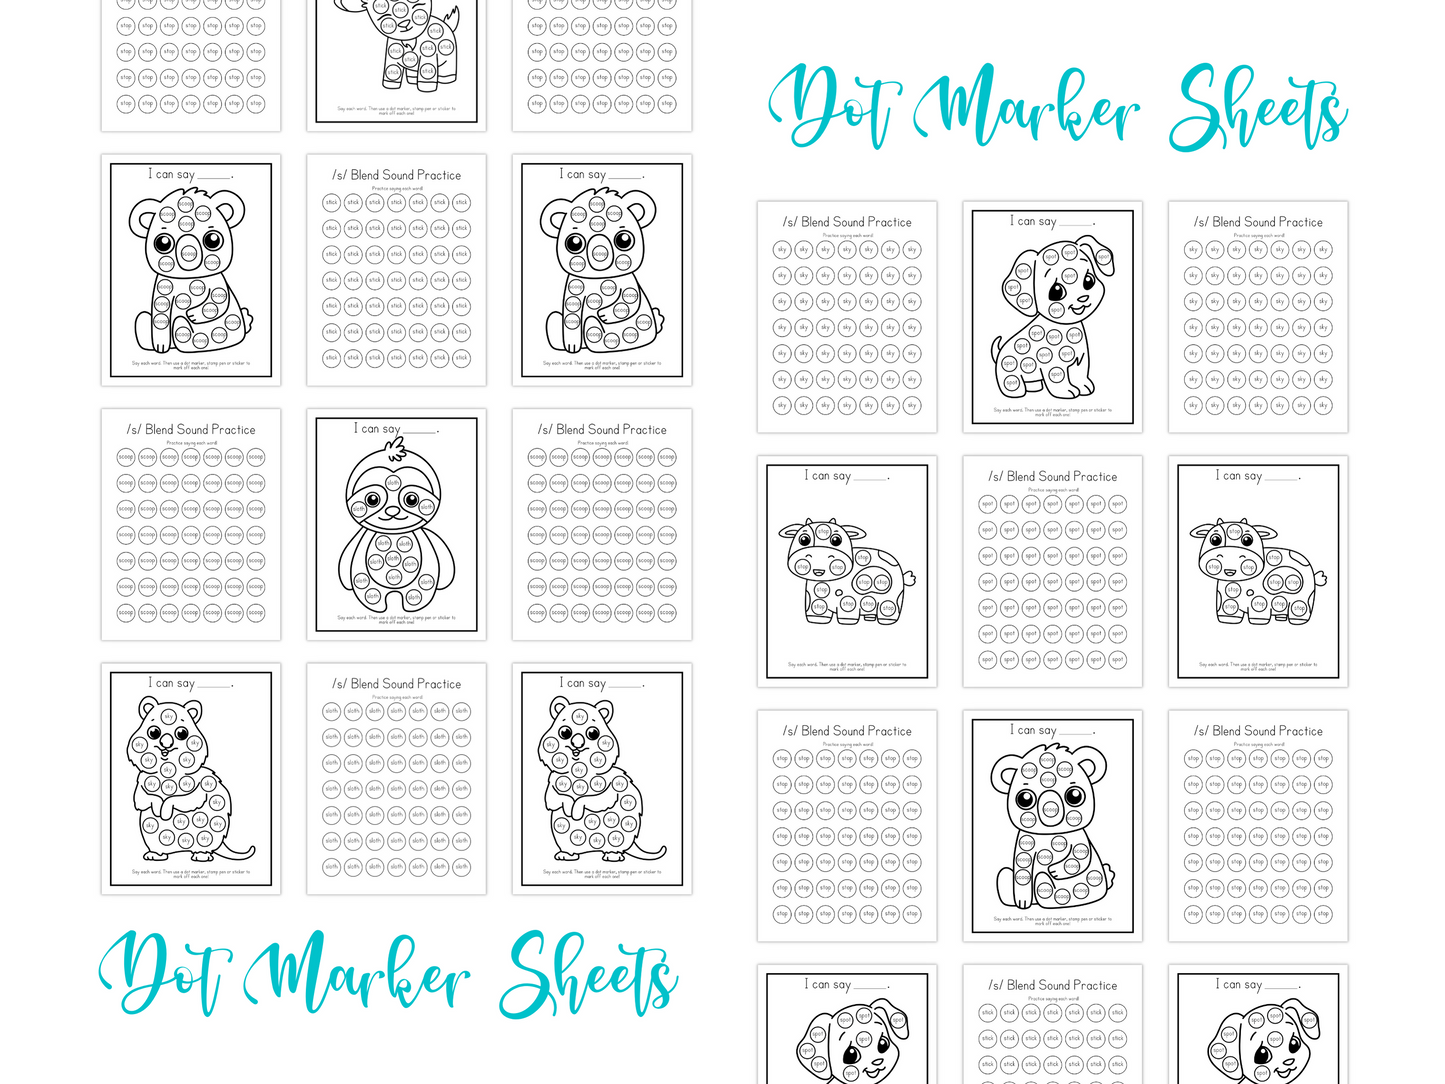 Dot Marker Speech Sound Practice Coloring Pages | /s/ Blend Sound Words